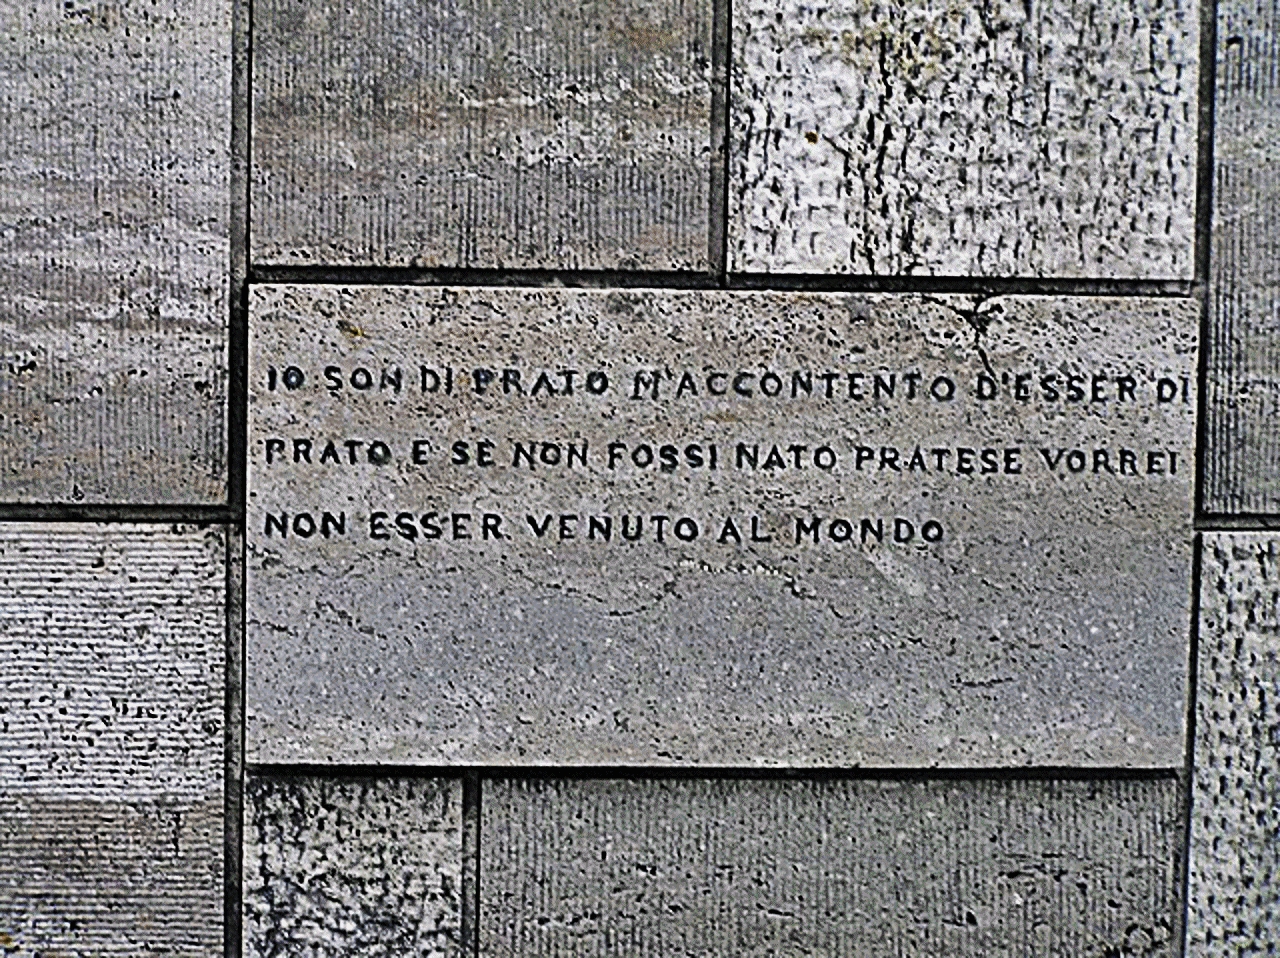 Engraving on the mausoleum's wall